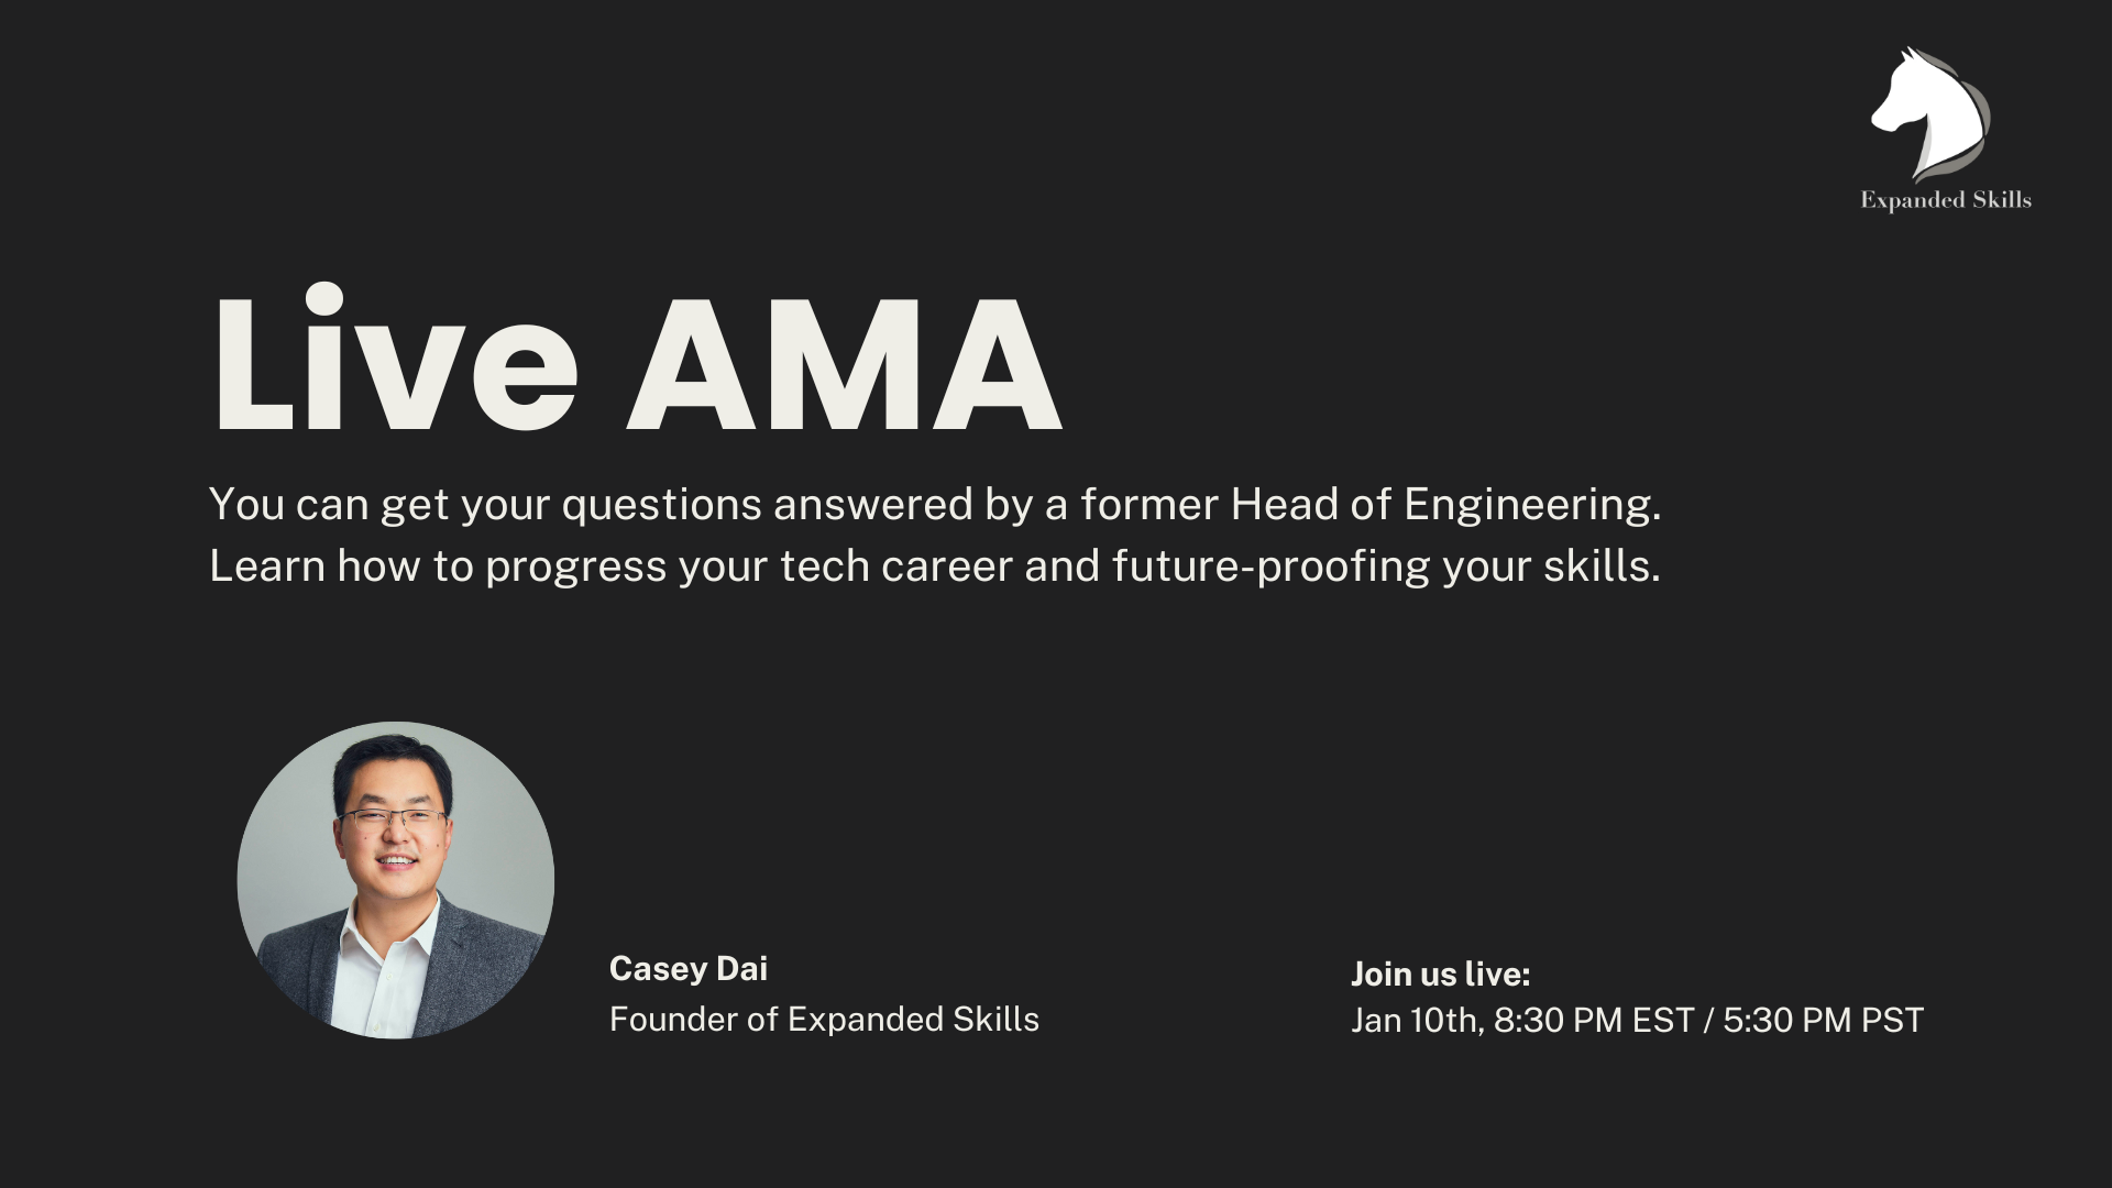 Live AMA with Casey Dai - Former Head of Engineering & Founder of Expanded Skills event